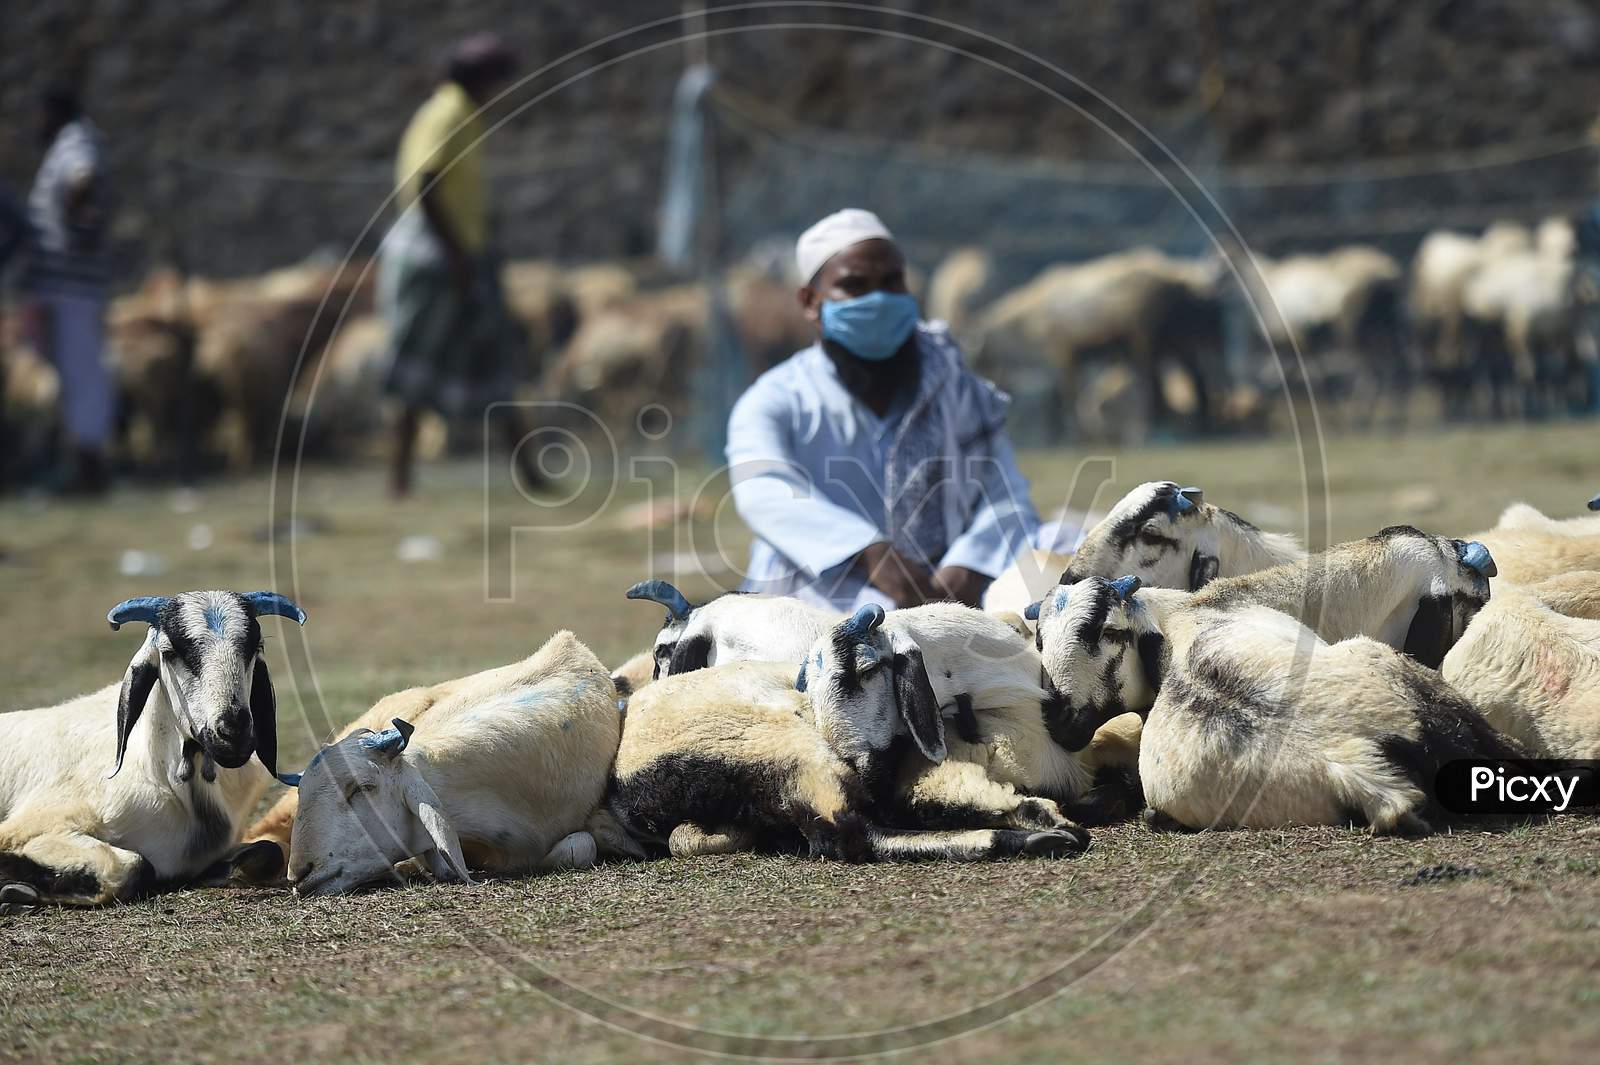 A Buyer Selects His Sacrificial Animal At A Livestock Market Ahead Of Eid Al- Adha, July 31, 2020 In Chennai